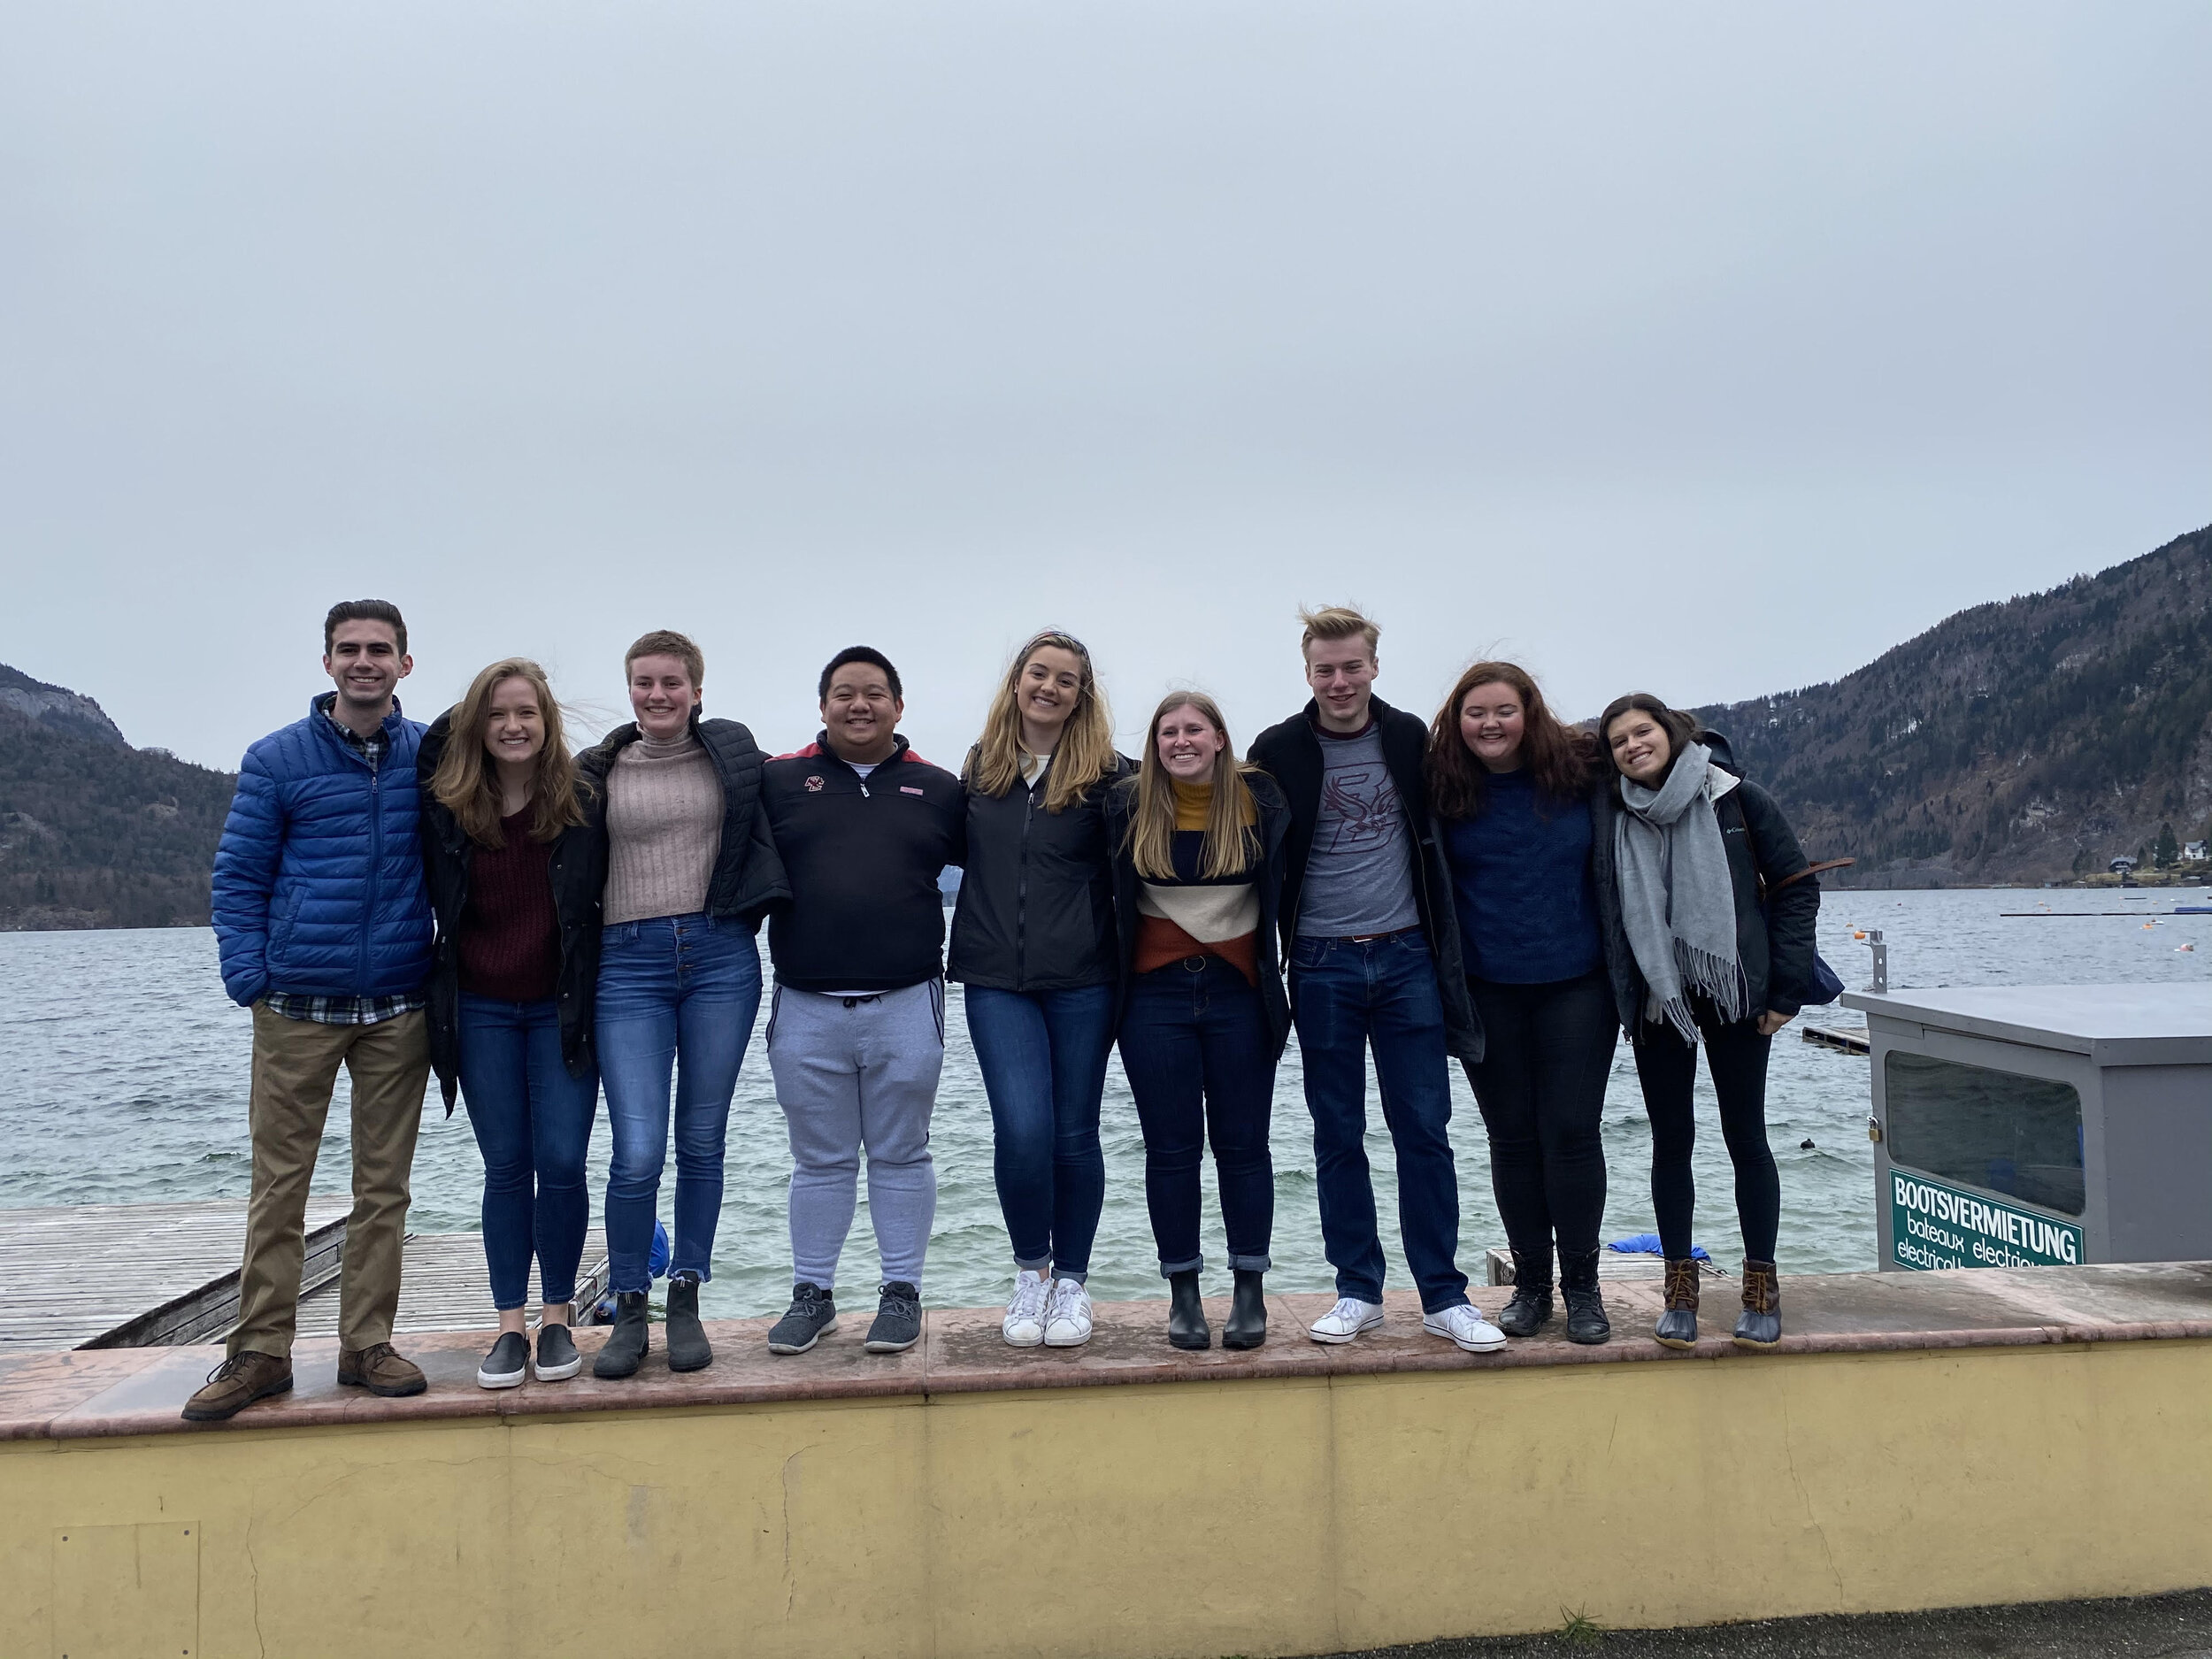 The 2019-2020 Chorale Officers on our Spring Break Singing Tour this year.